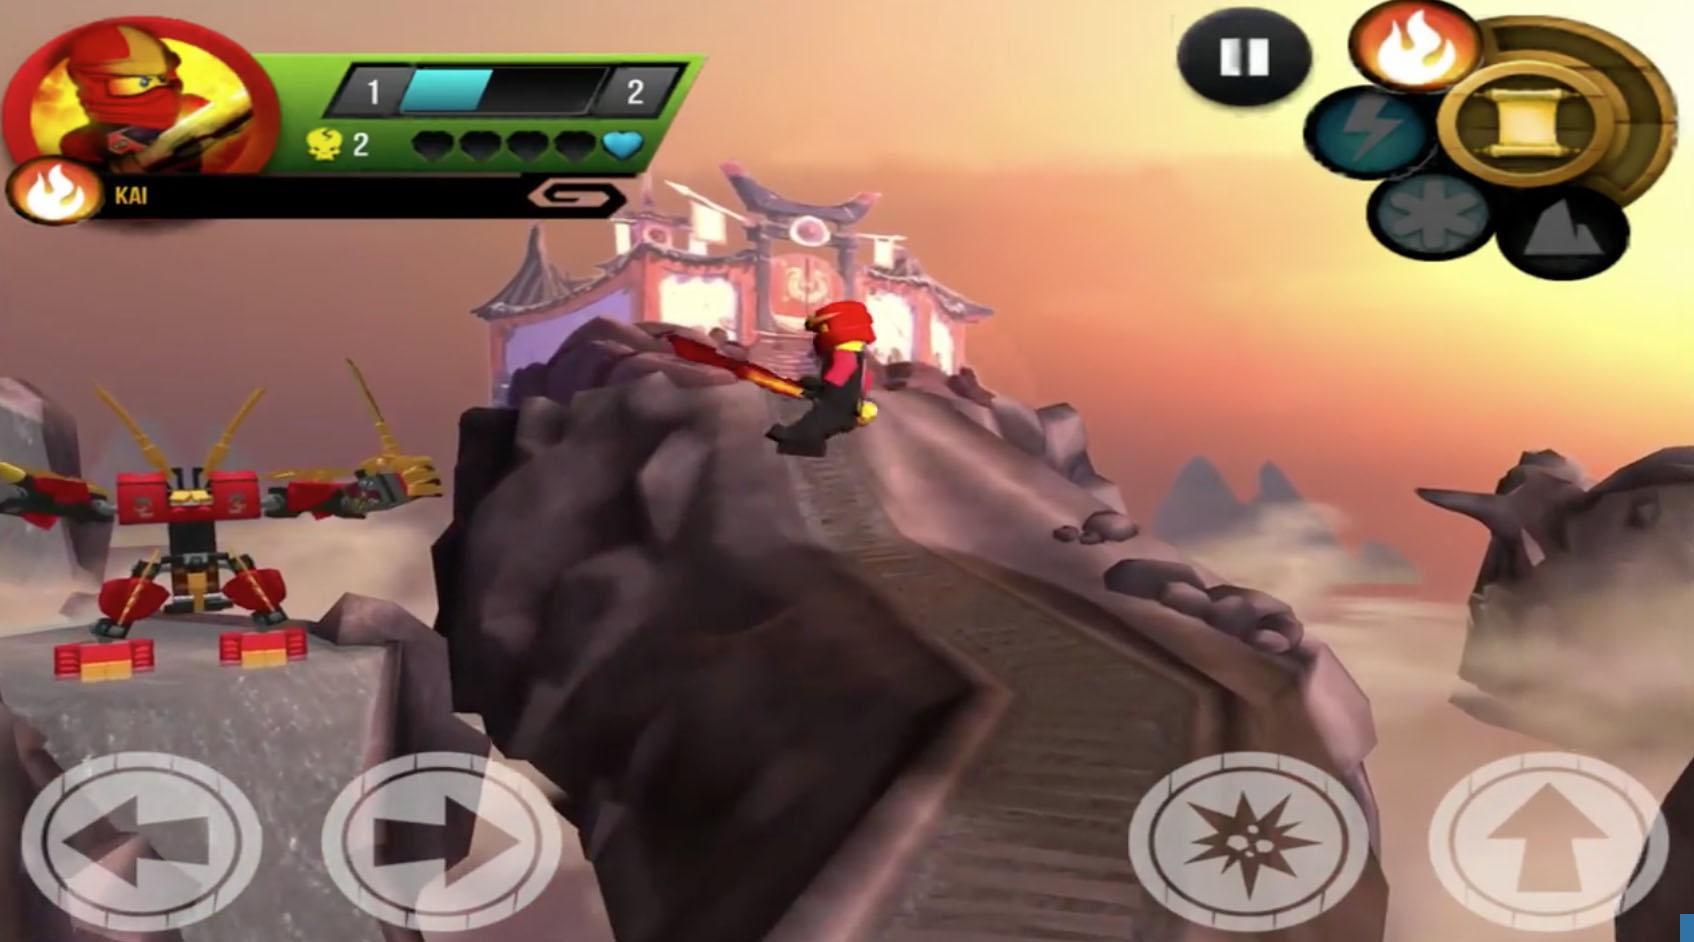 Guide LEGO Ninjago The Final Battle For Android - APK Download